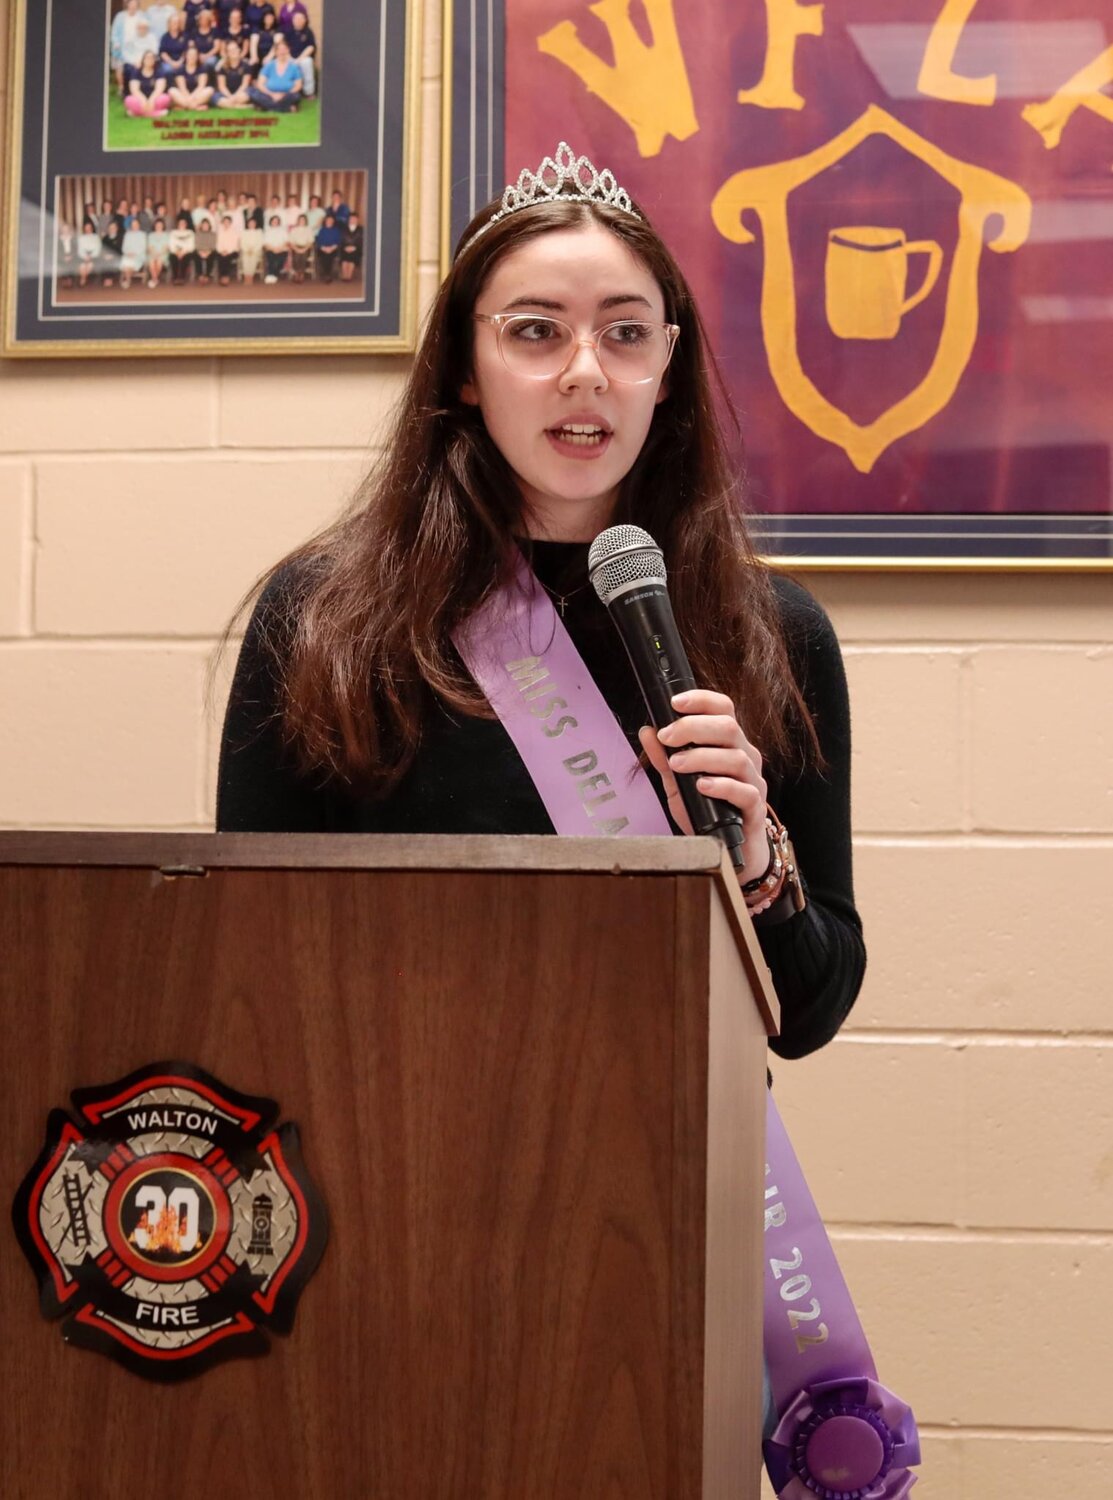 Promoting the fair is among the duties of Miss Delaware County.